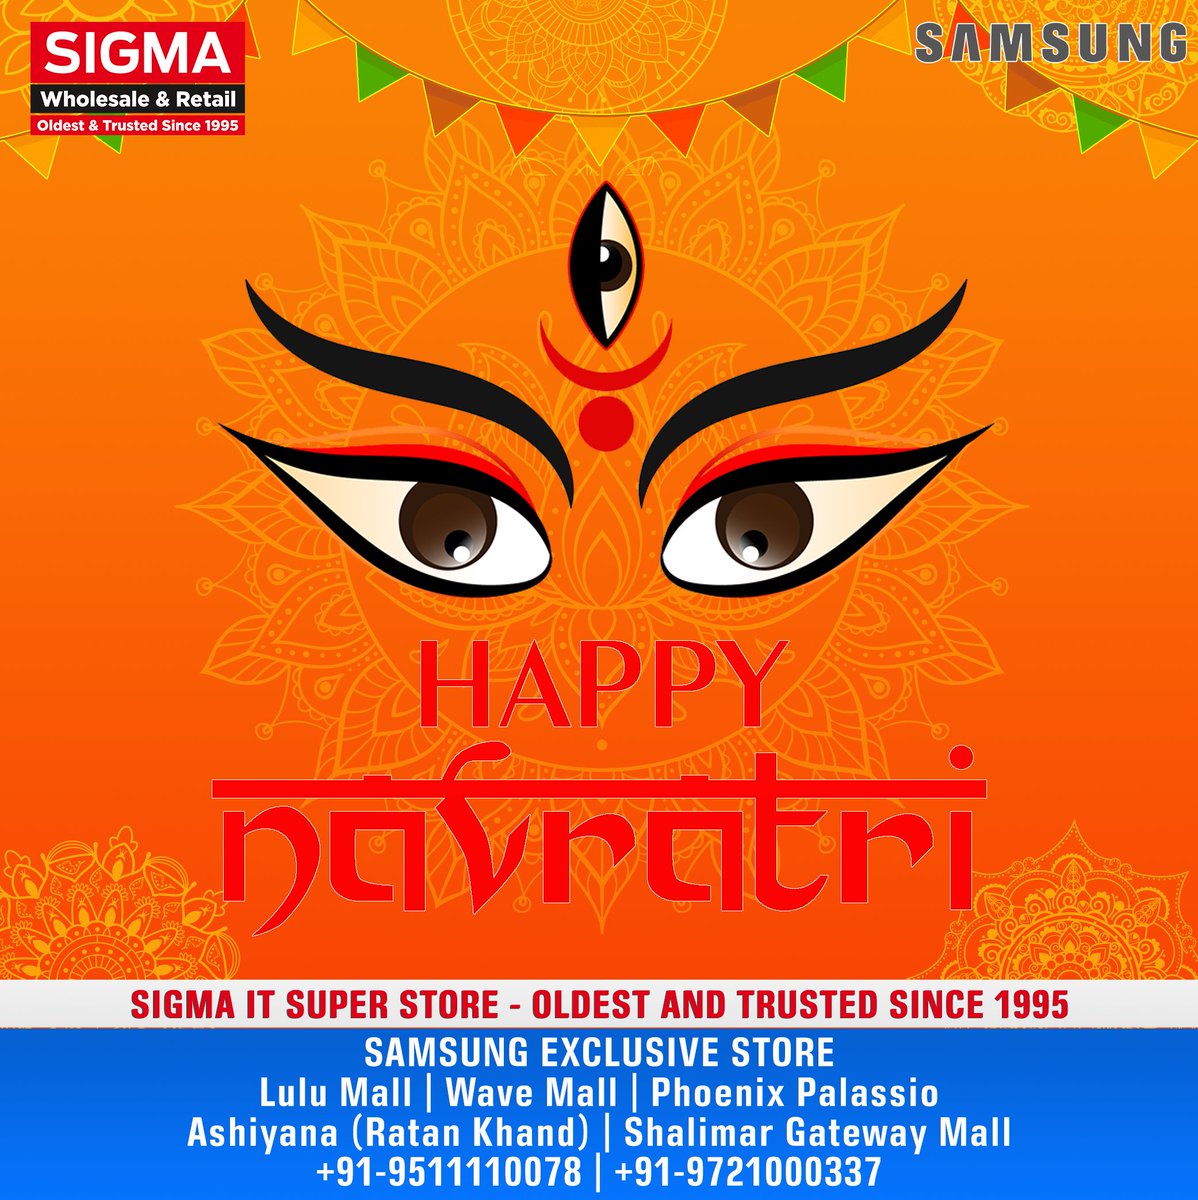 May Durga Ma on this Navratri bless you and your family with immense joy, prosperity, and strength. #Samsung

Happy Navratri! Jai Mata Di! 🙏🎉

#HappyNavratri #Navratri #Navratri2024
#SigmaITSuperStore